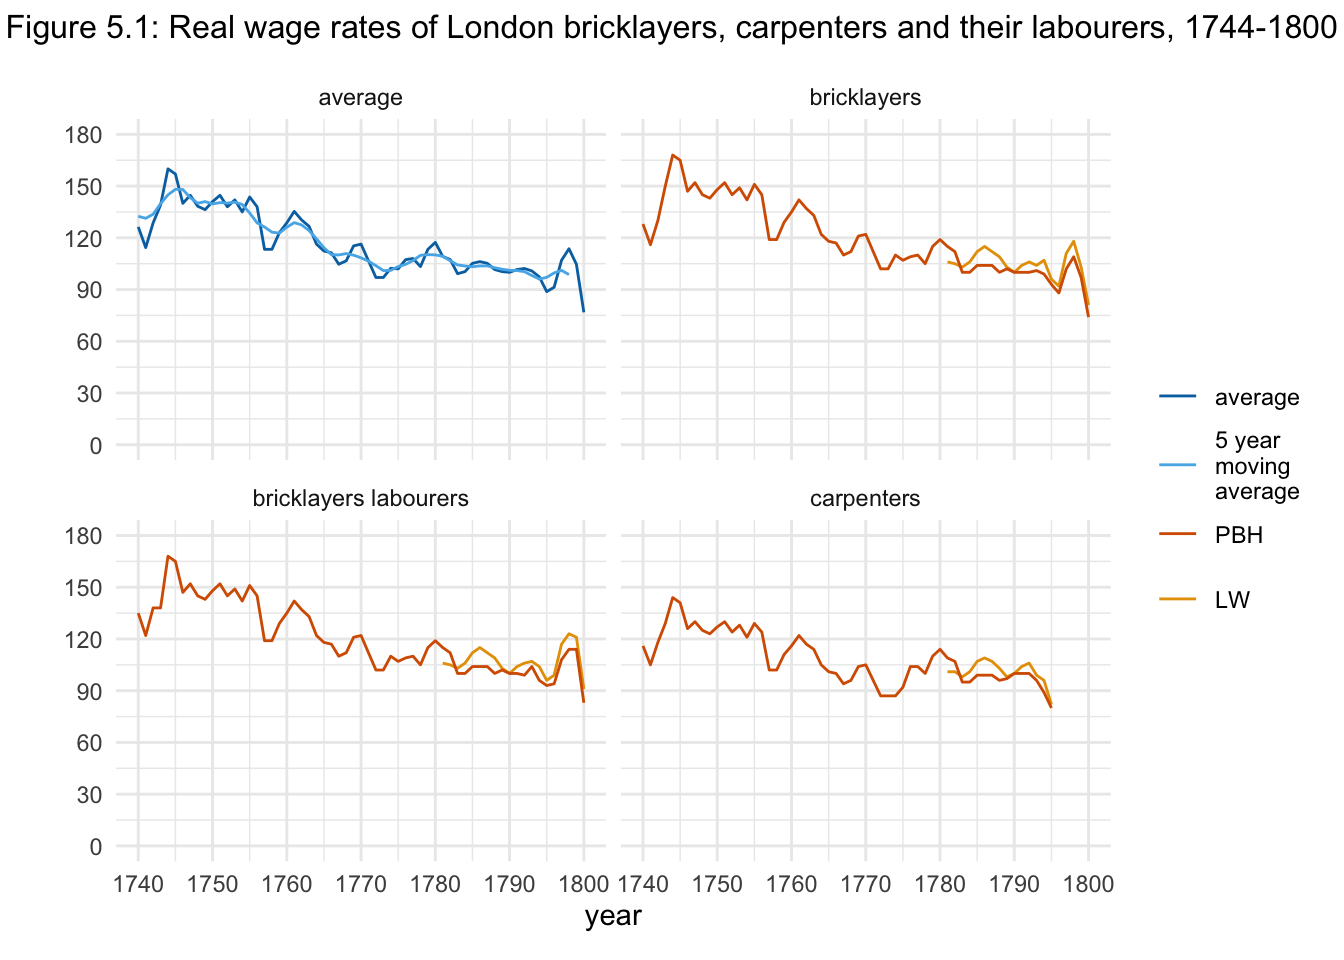 Figure 5.1: Real wage rates of London bricklayers, carpenters and their labourers, 1744-1800